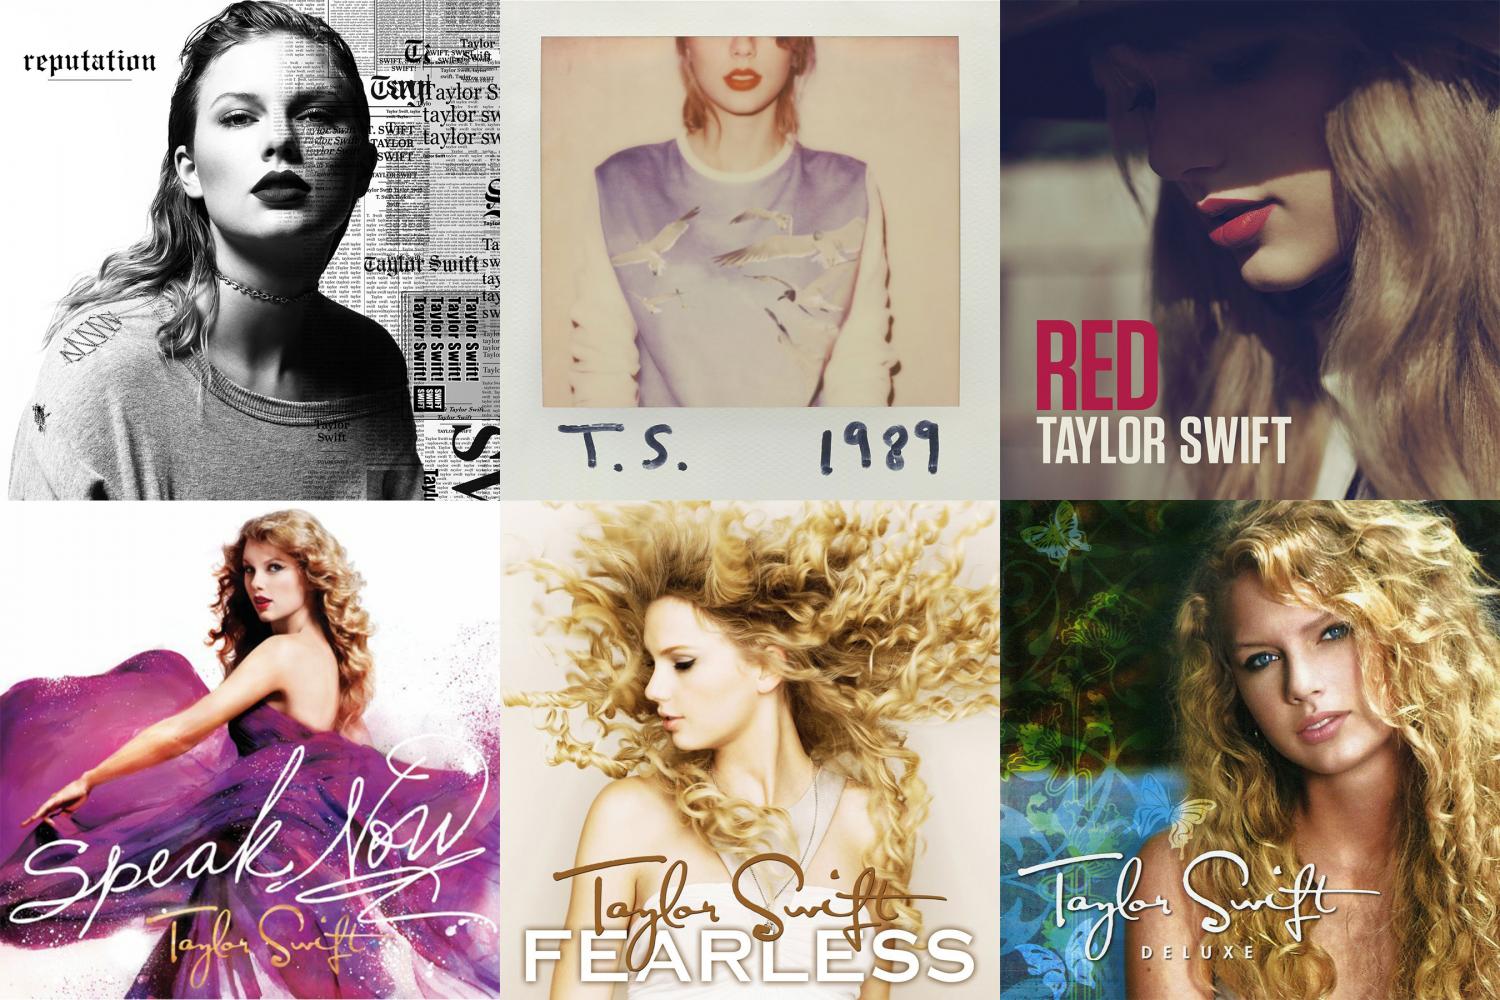 A look at Taylor Swift’s lead singles over her career